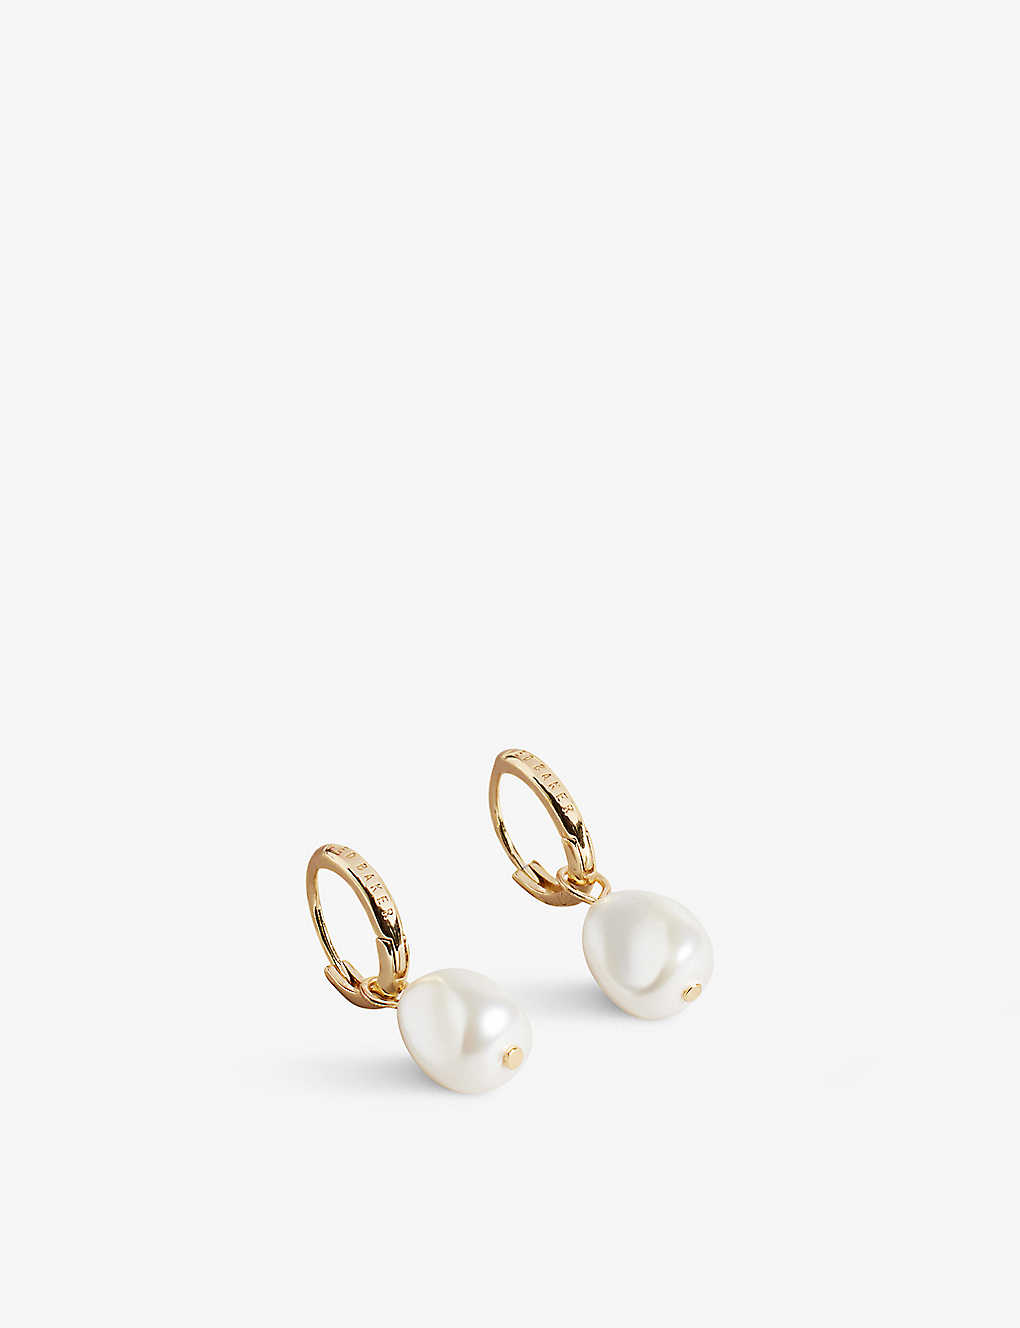 TED BAKER TED BAKER WOMEN'S GOLD-COL PERIAA BRASS AND FAUX-PEARL HUGGIE EARRINGS,65467221